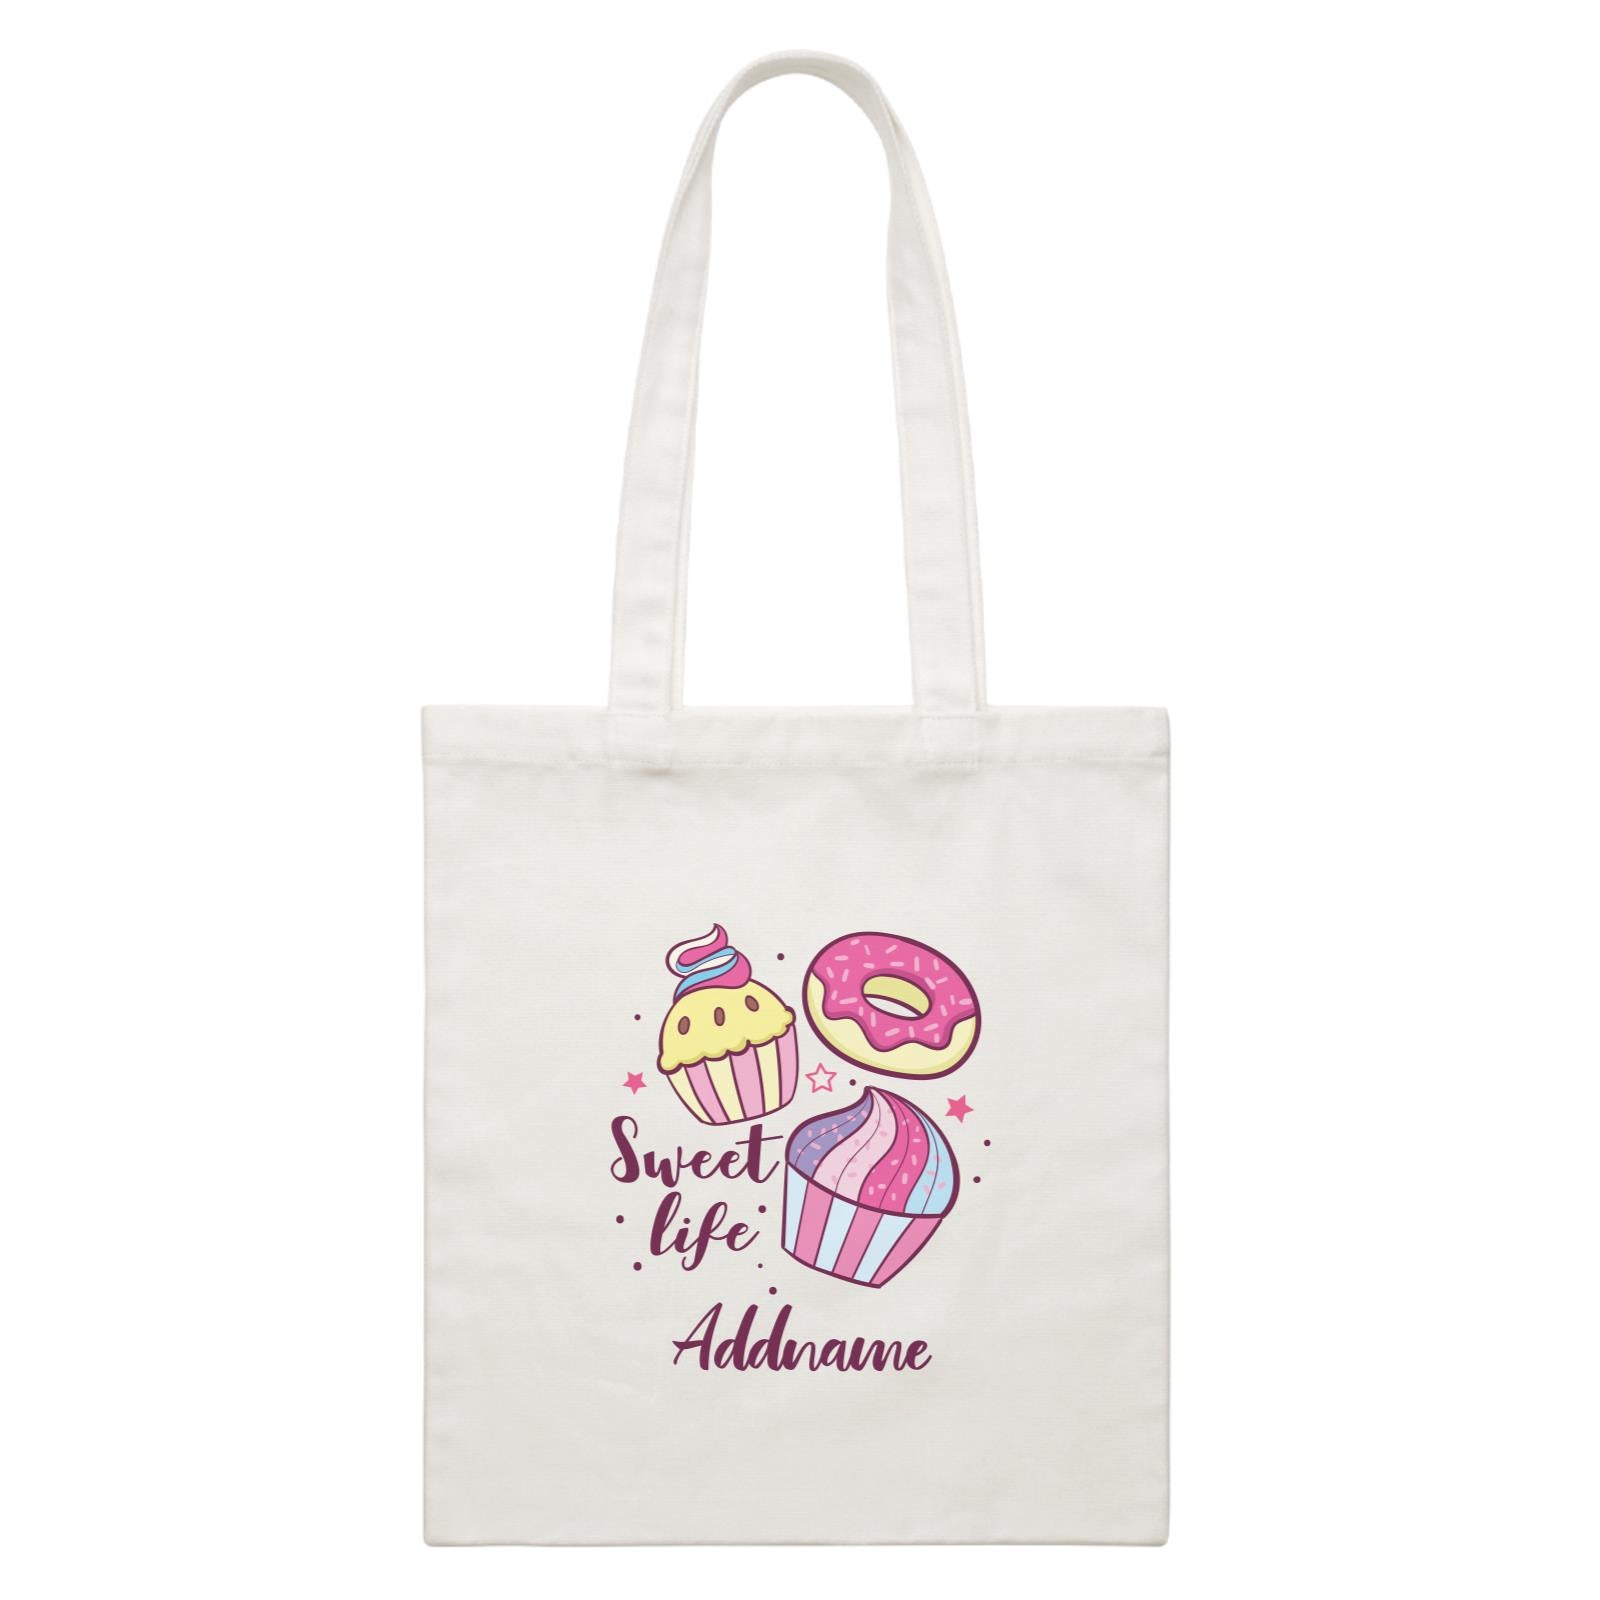 Cool Cute Foods Sweet Life Dessert Addname White Canvas Bag